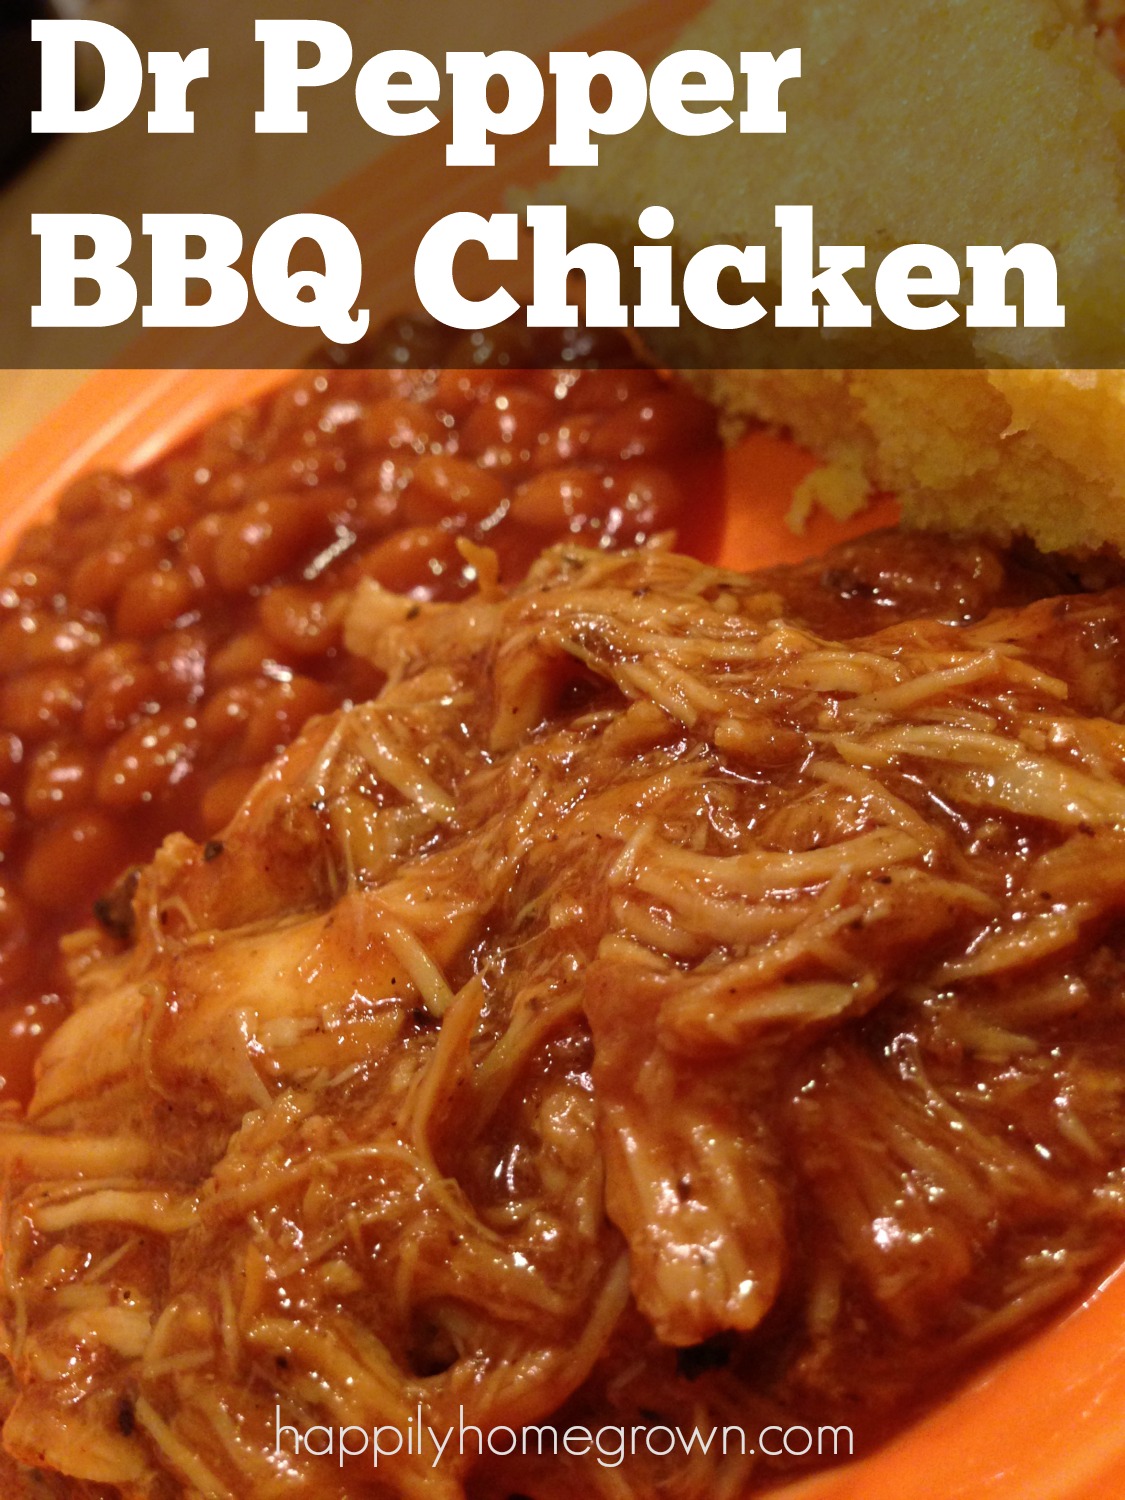 Dr Pepper Bbq Chicken Happily Homegrown,Spanish Coffee Mugs